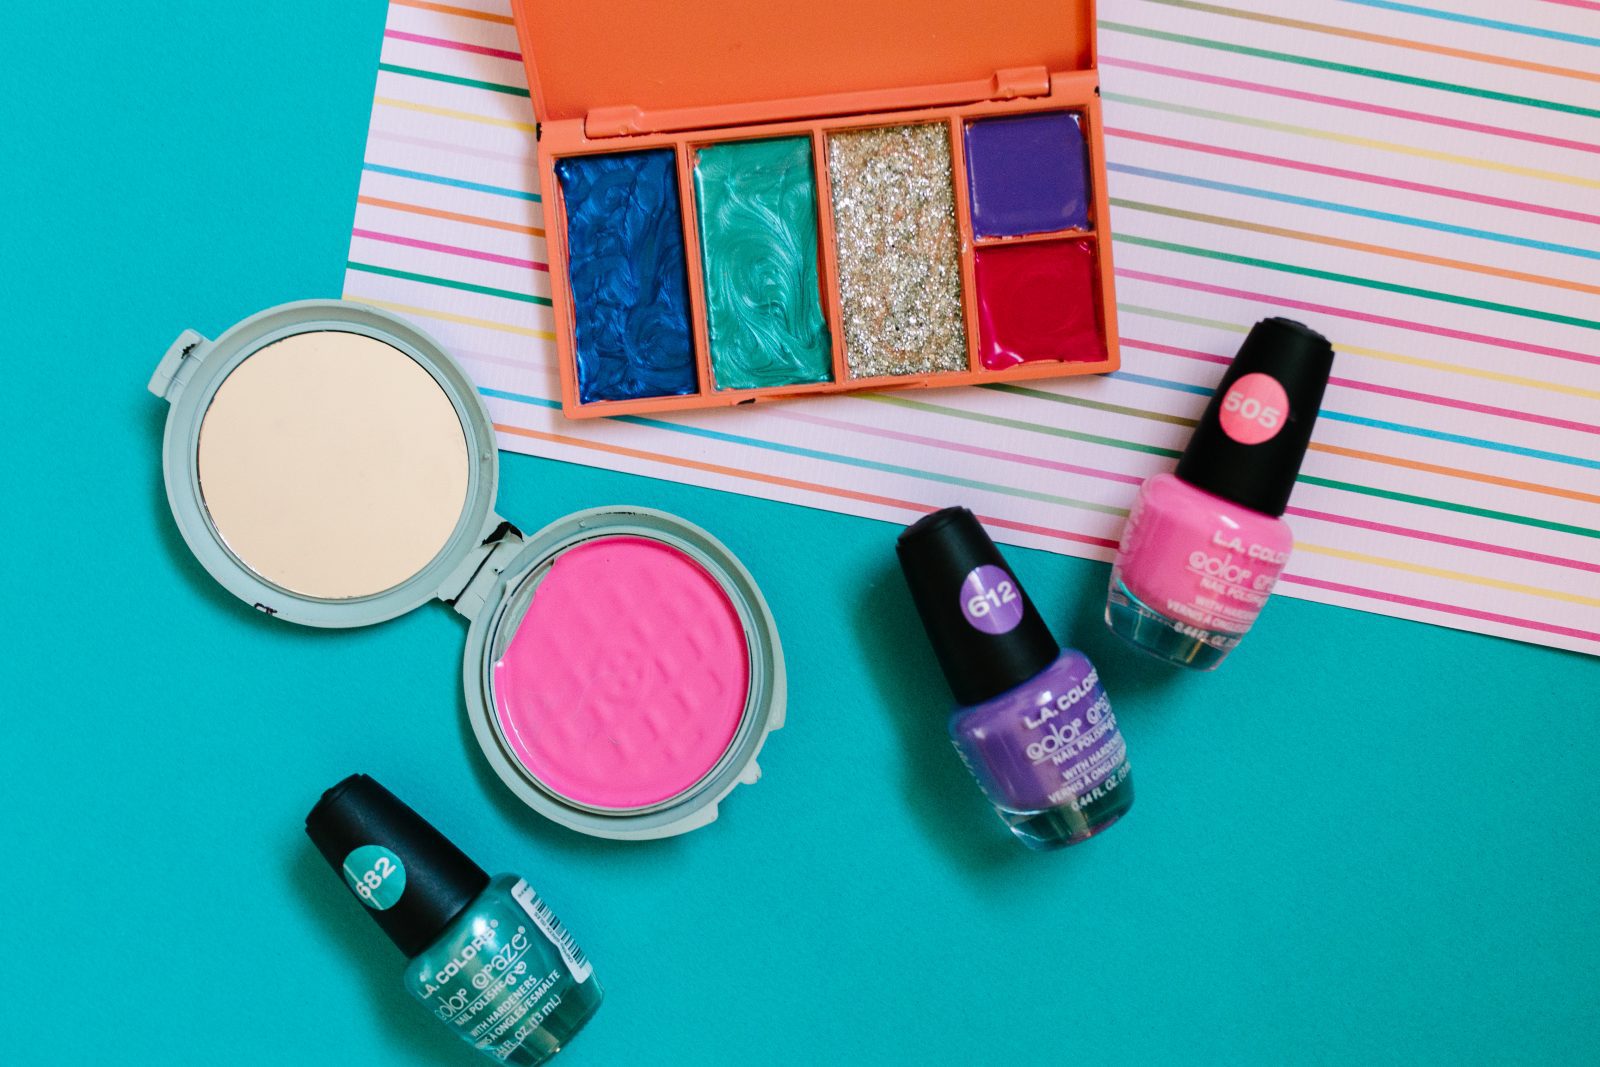 How to Make an Easy Play Makeup Set + a tutorial featured by Top US Craft Blog + The Pretty Life Girls